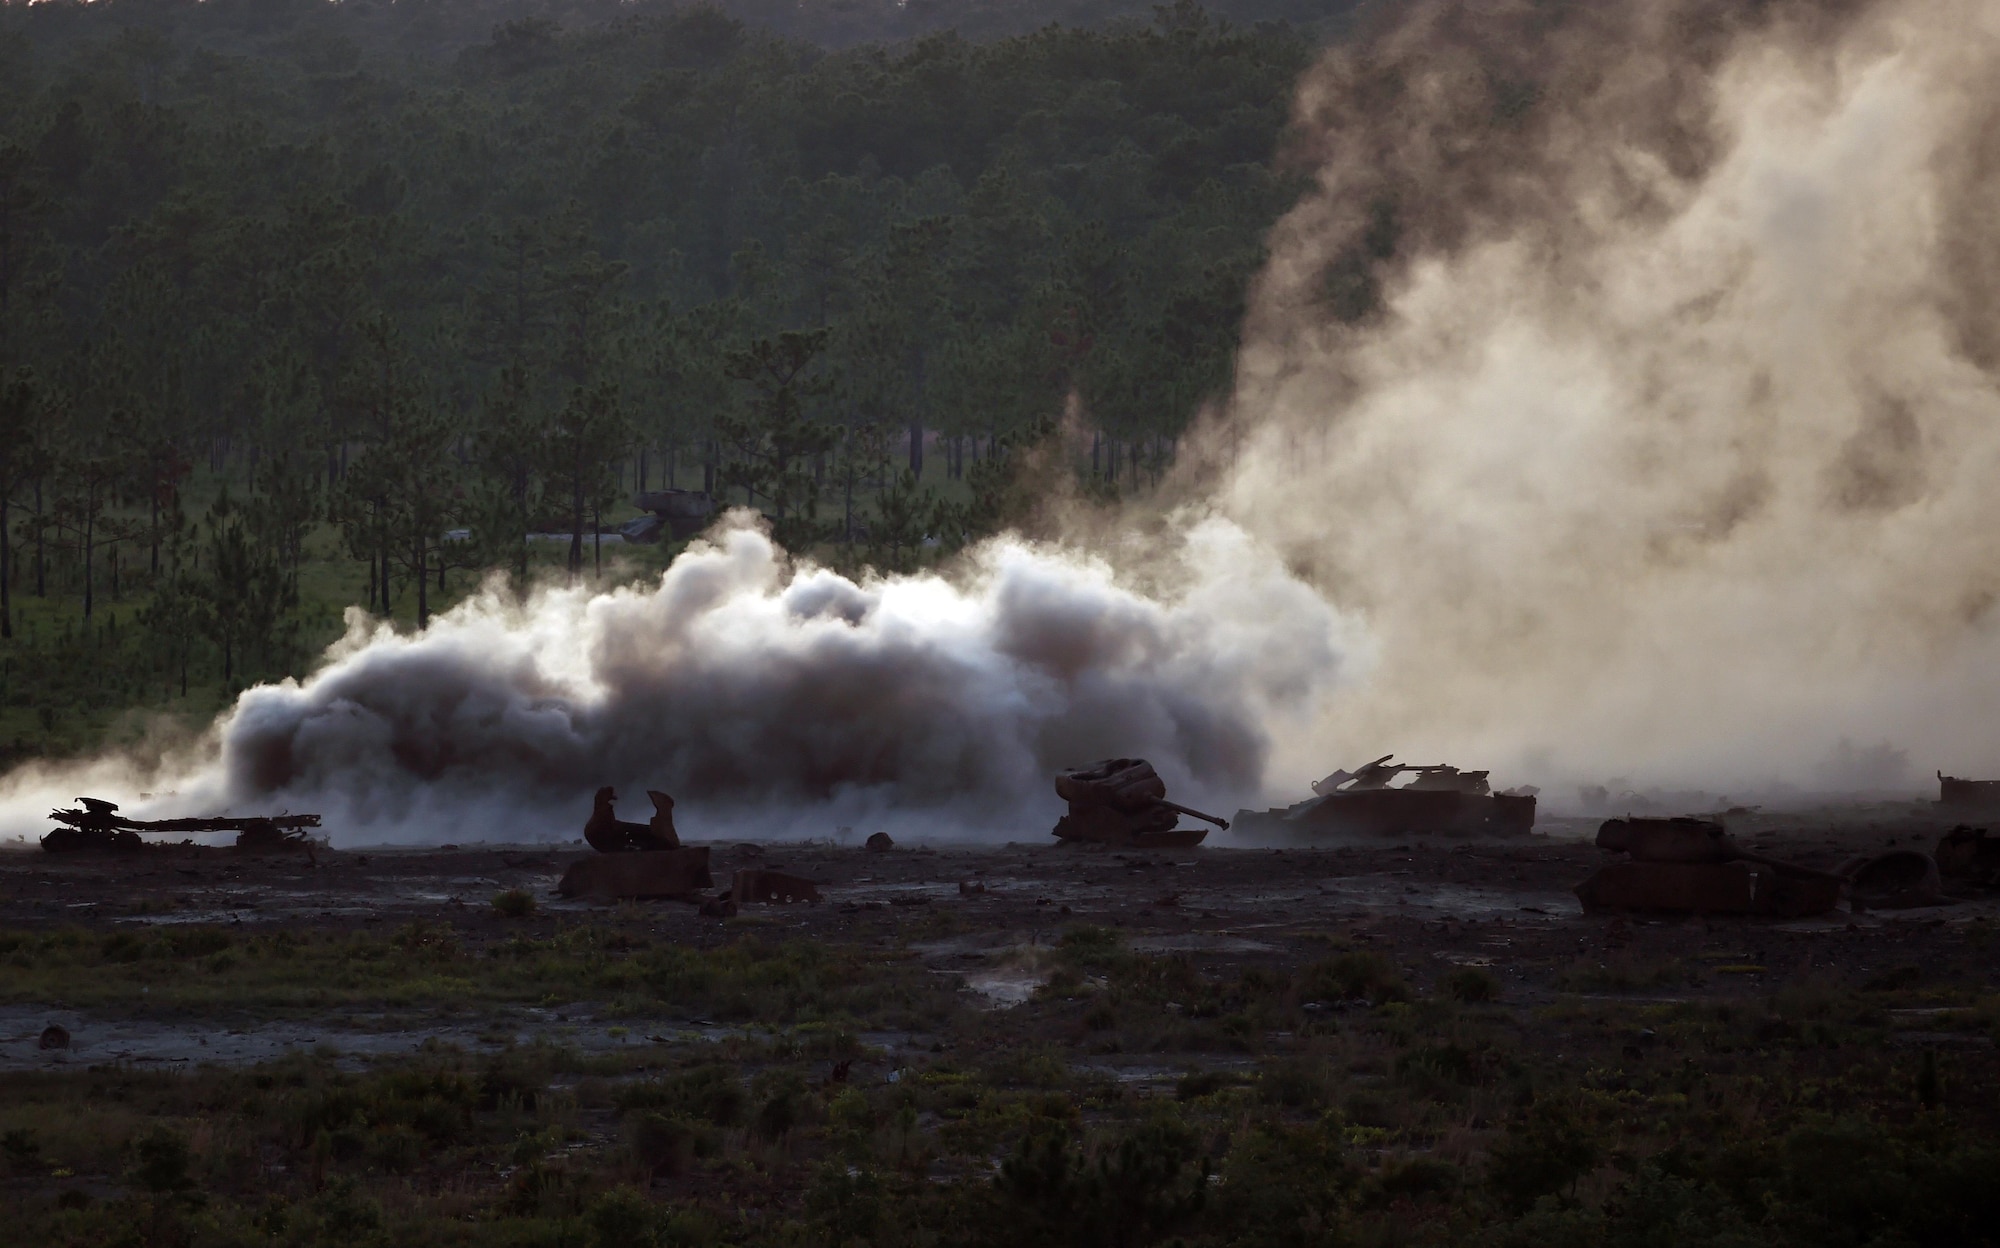 Smoke rises from the aftermath of a 105mm howitzer round hitting a target during live-fire training, June 16, 2015, at Eglin Range, Fla. Aircrew members communicated closely with ground-range operators to ensure the gunship's rounds hit simulated enemy targets. (U.S. Air Force photo by Airman 1st Class Ryan Conroy/Released)